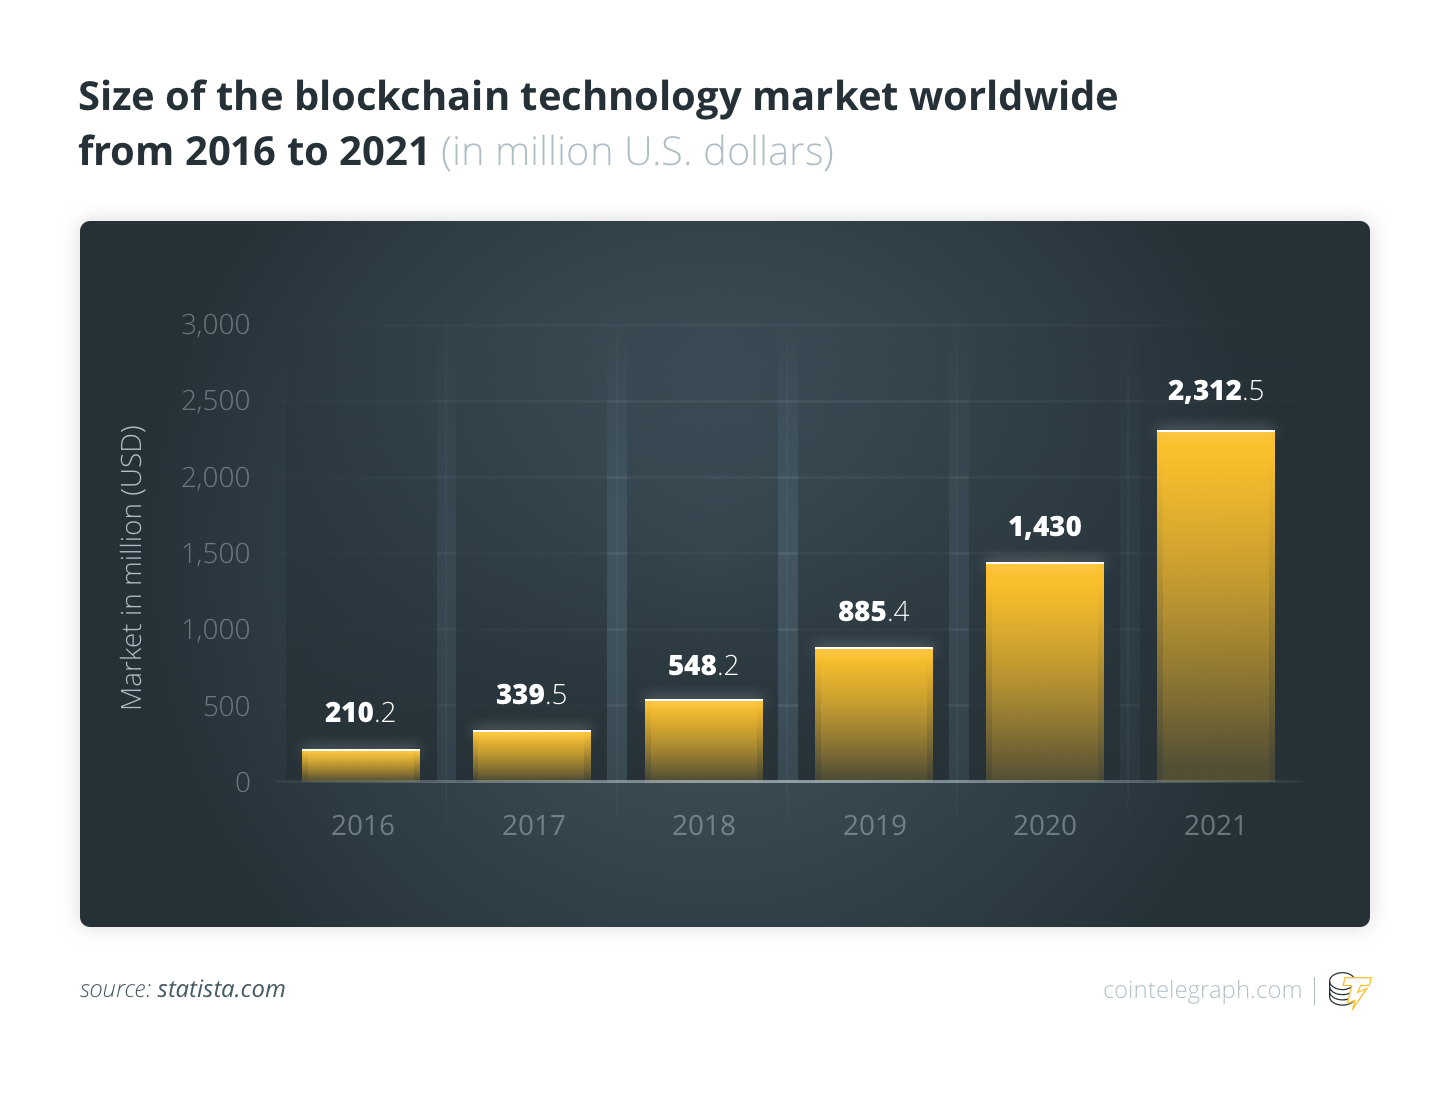 Size of the blockchain technology market worldwide from 2016 to 2021